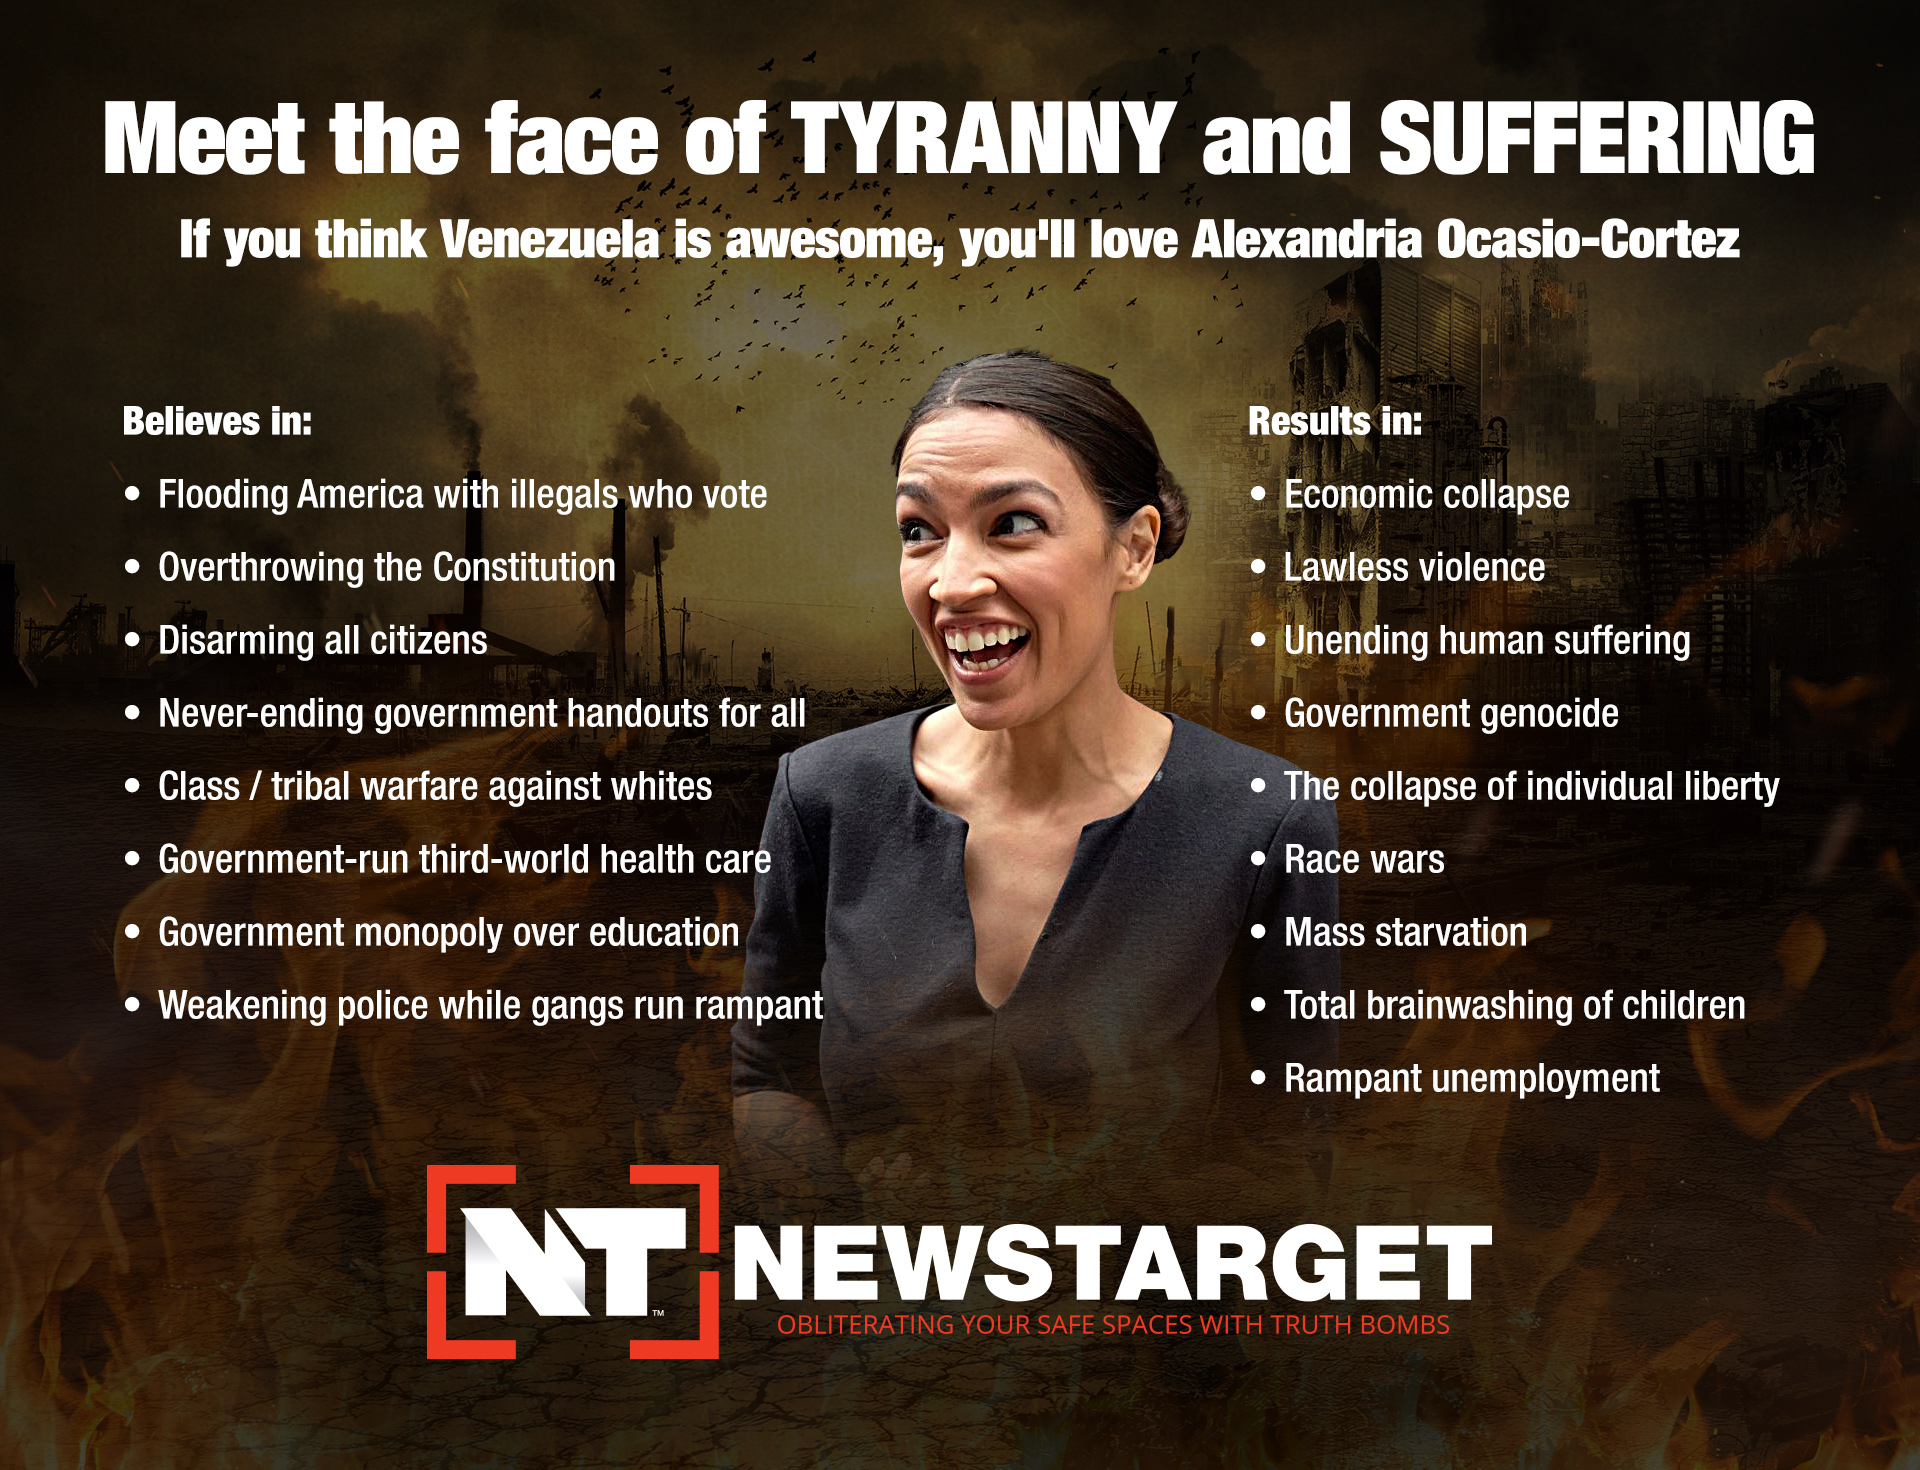 Ocasio-Cortez speaks like an ignorant high school student, and thinks like an economically illiterate communist